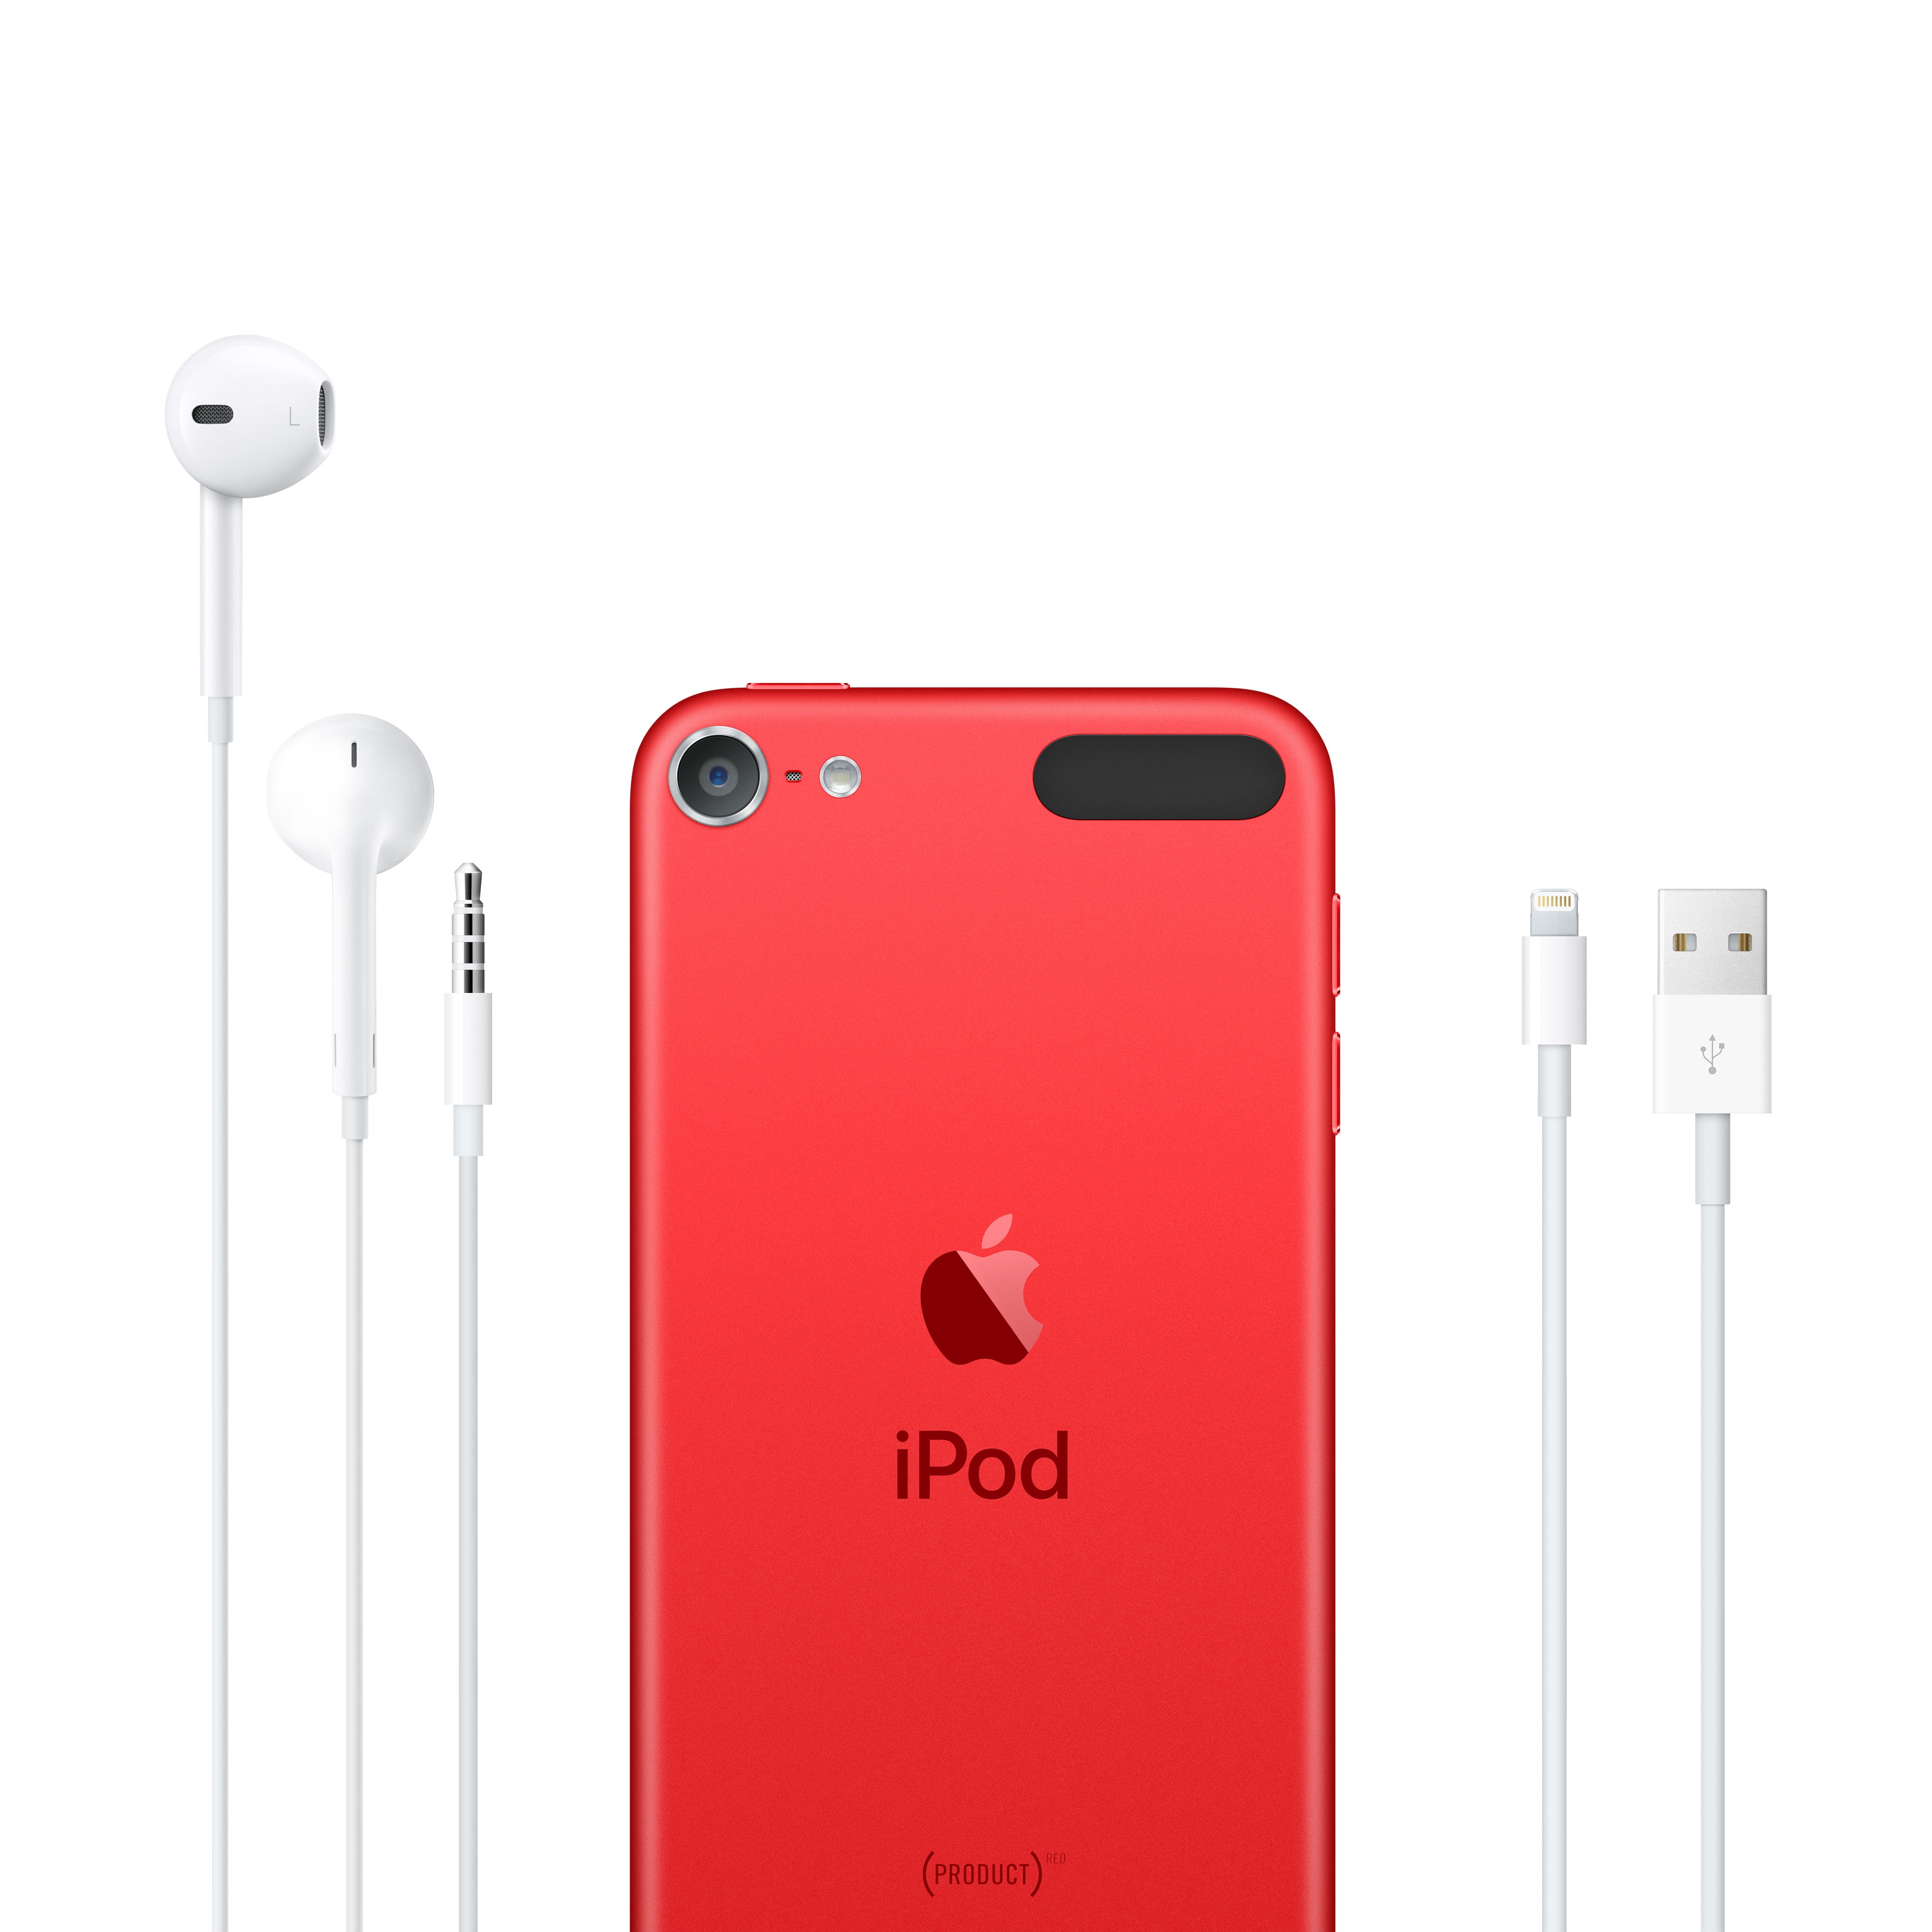 Apple iPod touch 7th Generation 256GB - PRODUCT(RED) (New